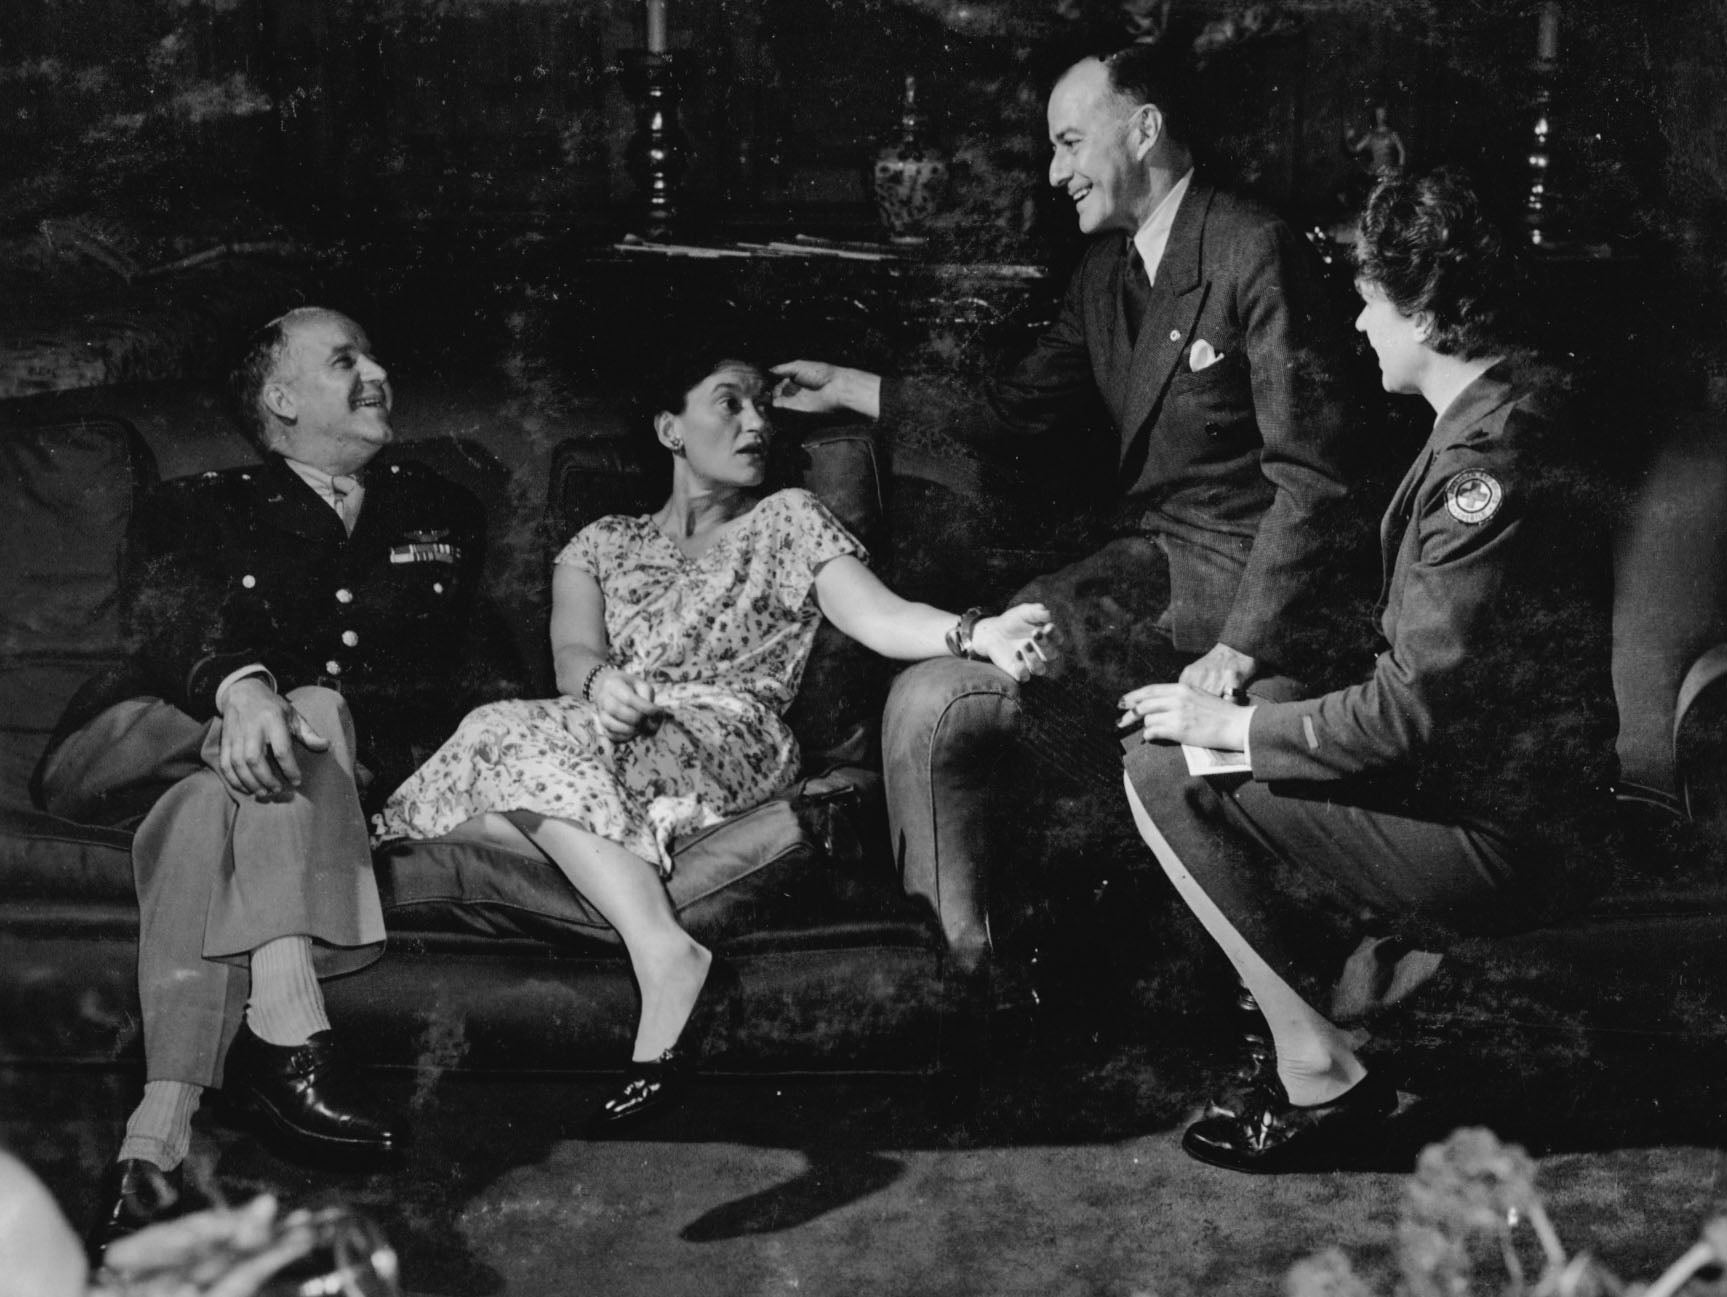 Gertie enjoyed a hectic social life when time allowed; here she sits on a couch with friends at a party at her London home in 1944